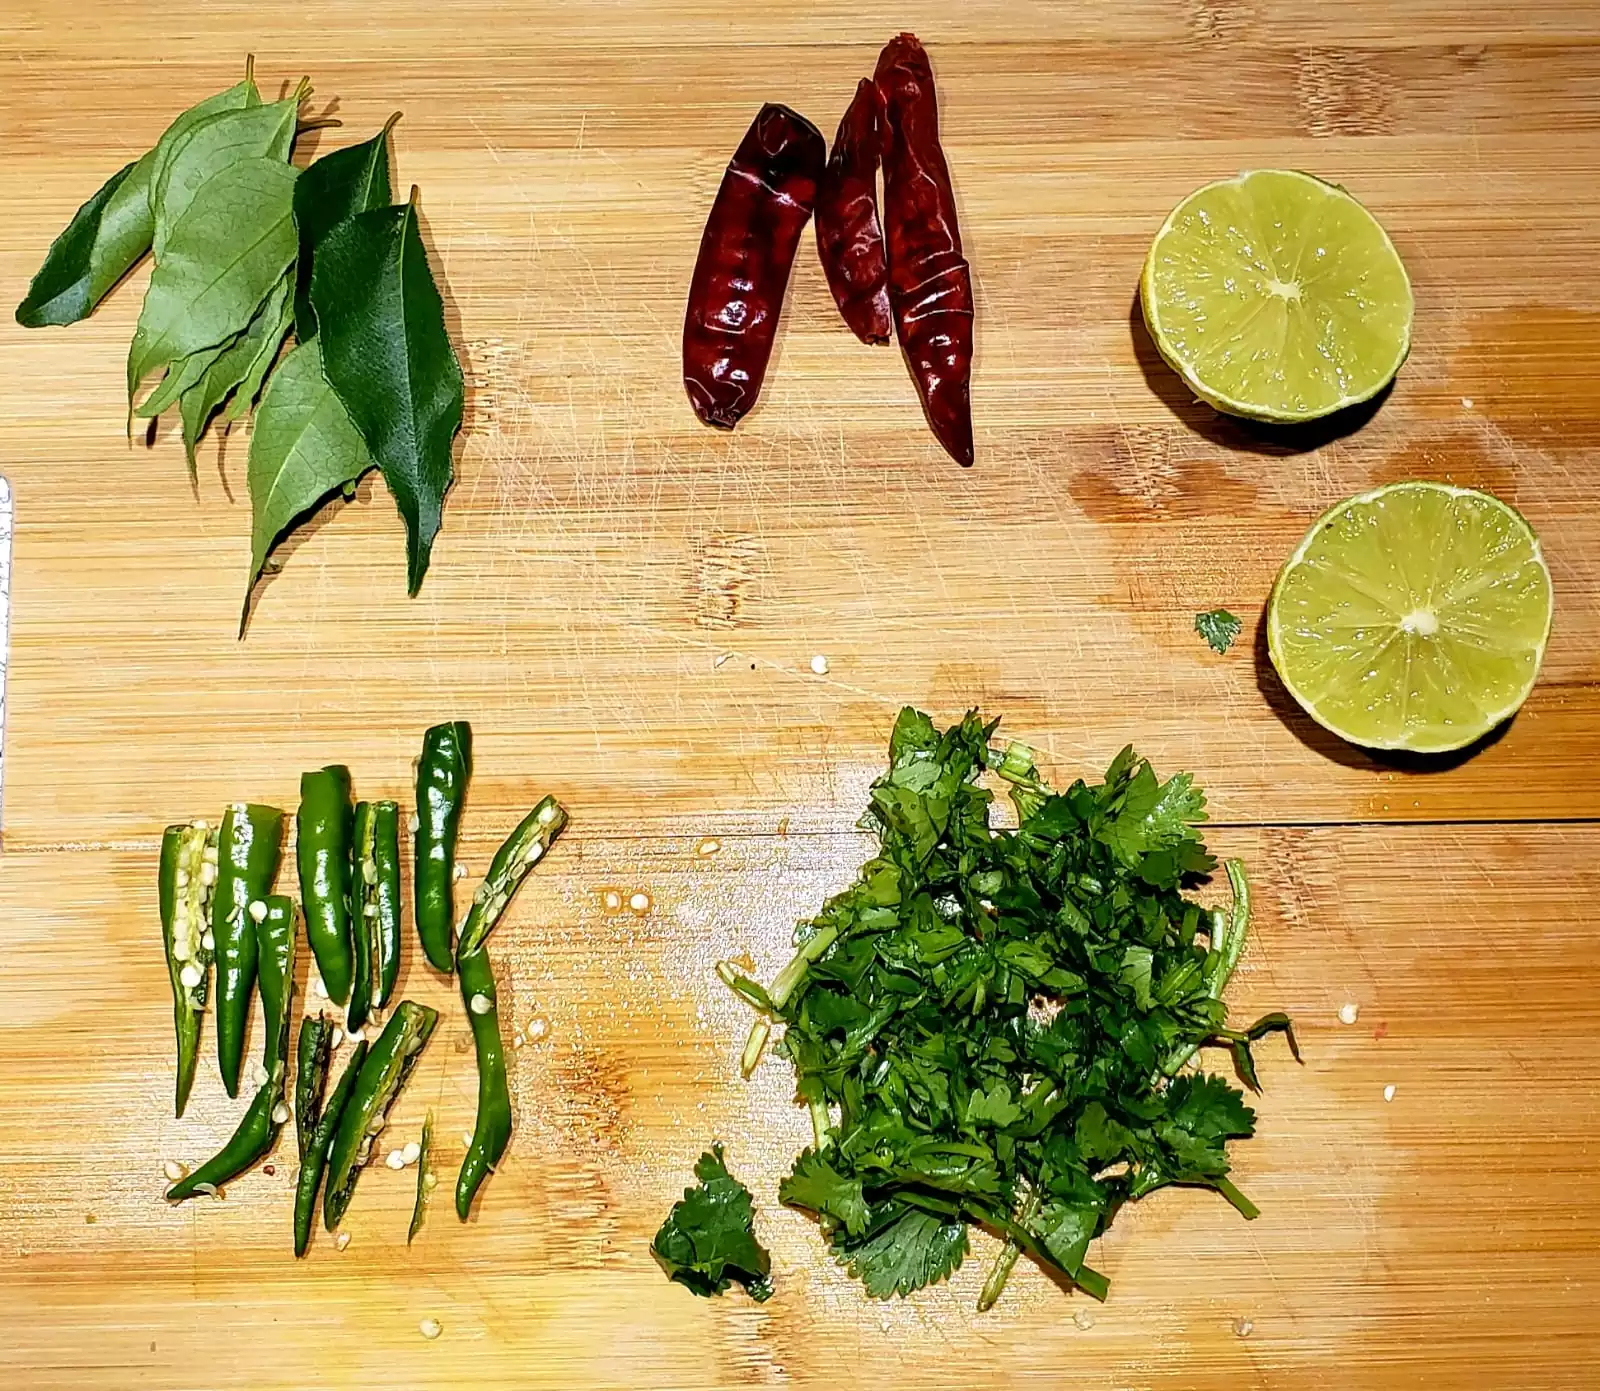 Ingredients for tampering: Curry leaves, red chillie, lemon slices, chopped cilantro & green chillies